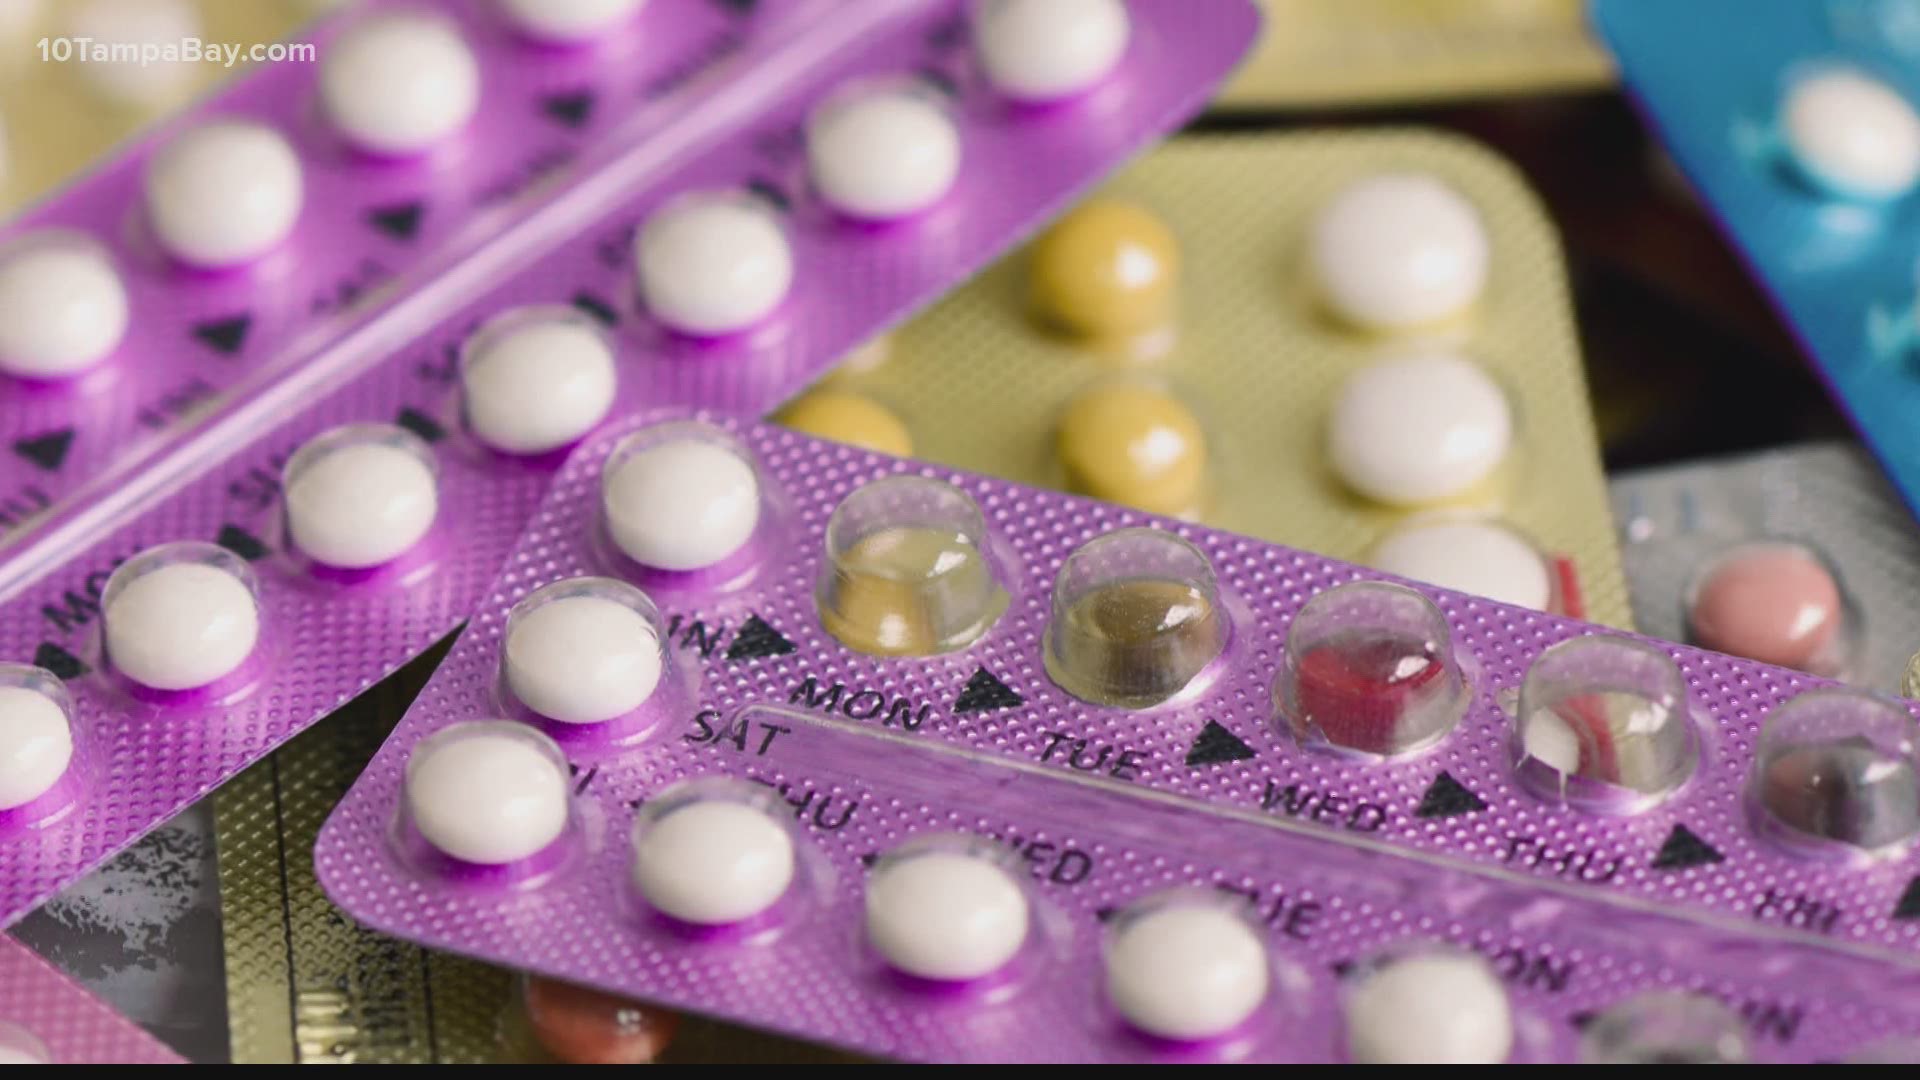 The court ruled the Trump administration acted properly when it let more employers who cite a religious or moral objection to opt-out of covering birth control.